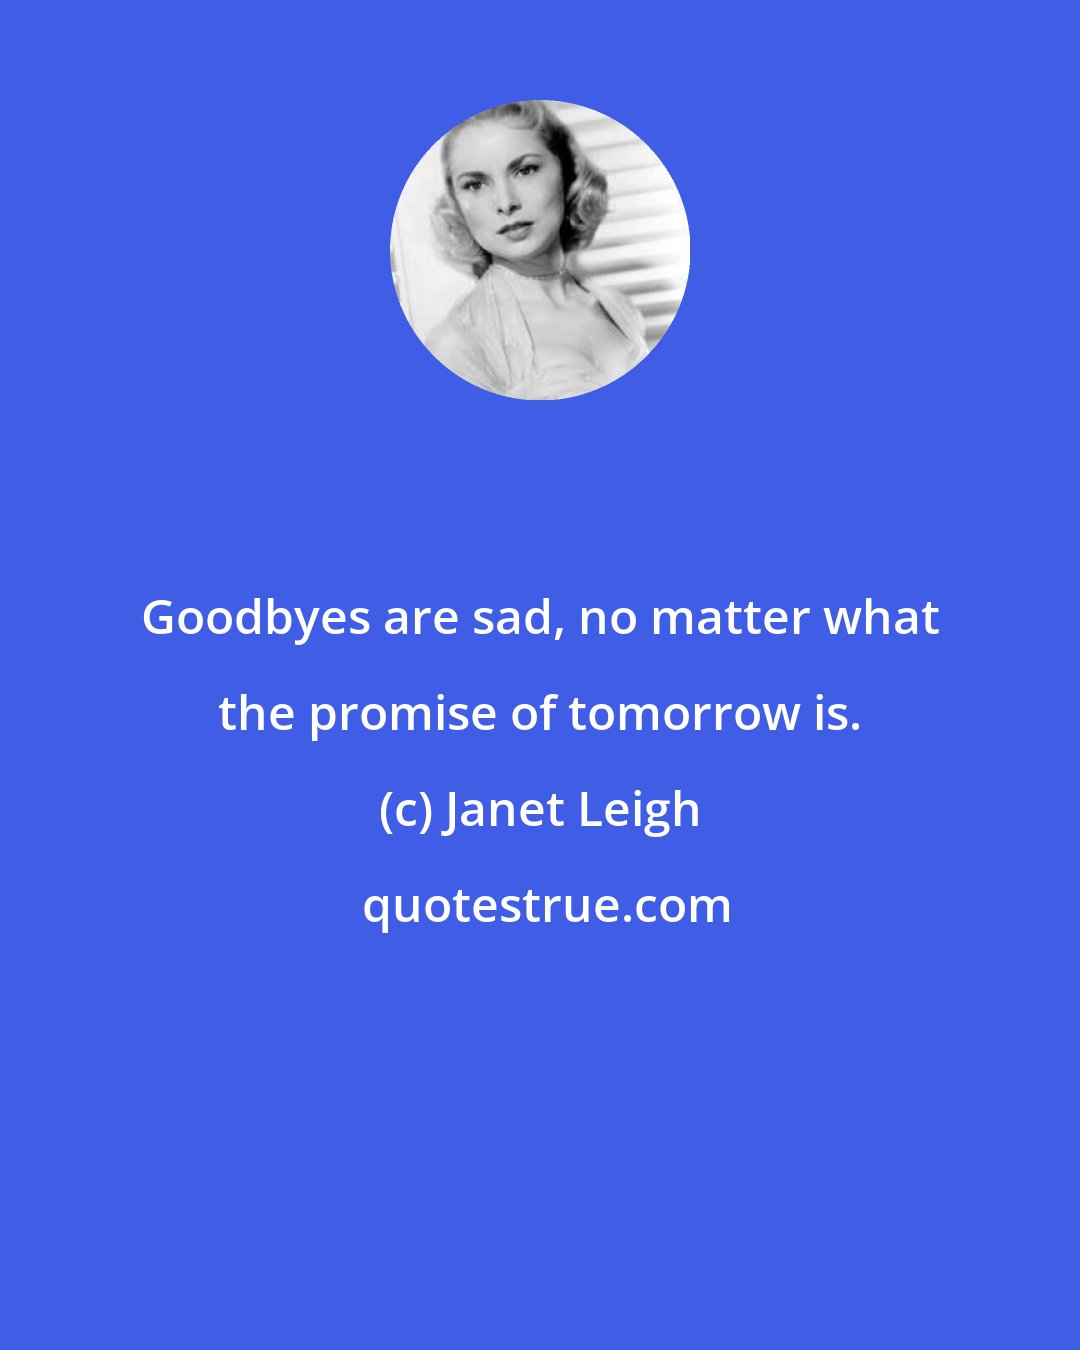 Janet Leigh: Goodbyes are sad, no matter what the promise of tomorrow is.